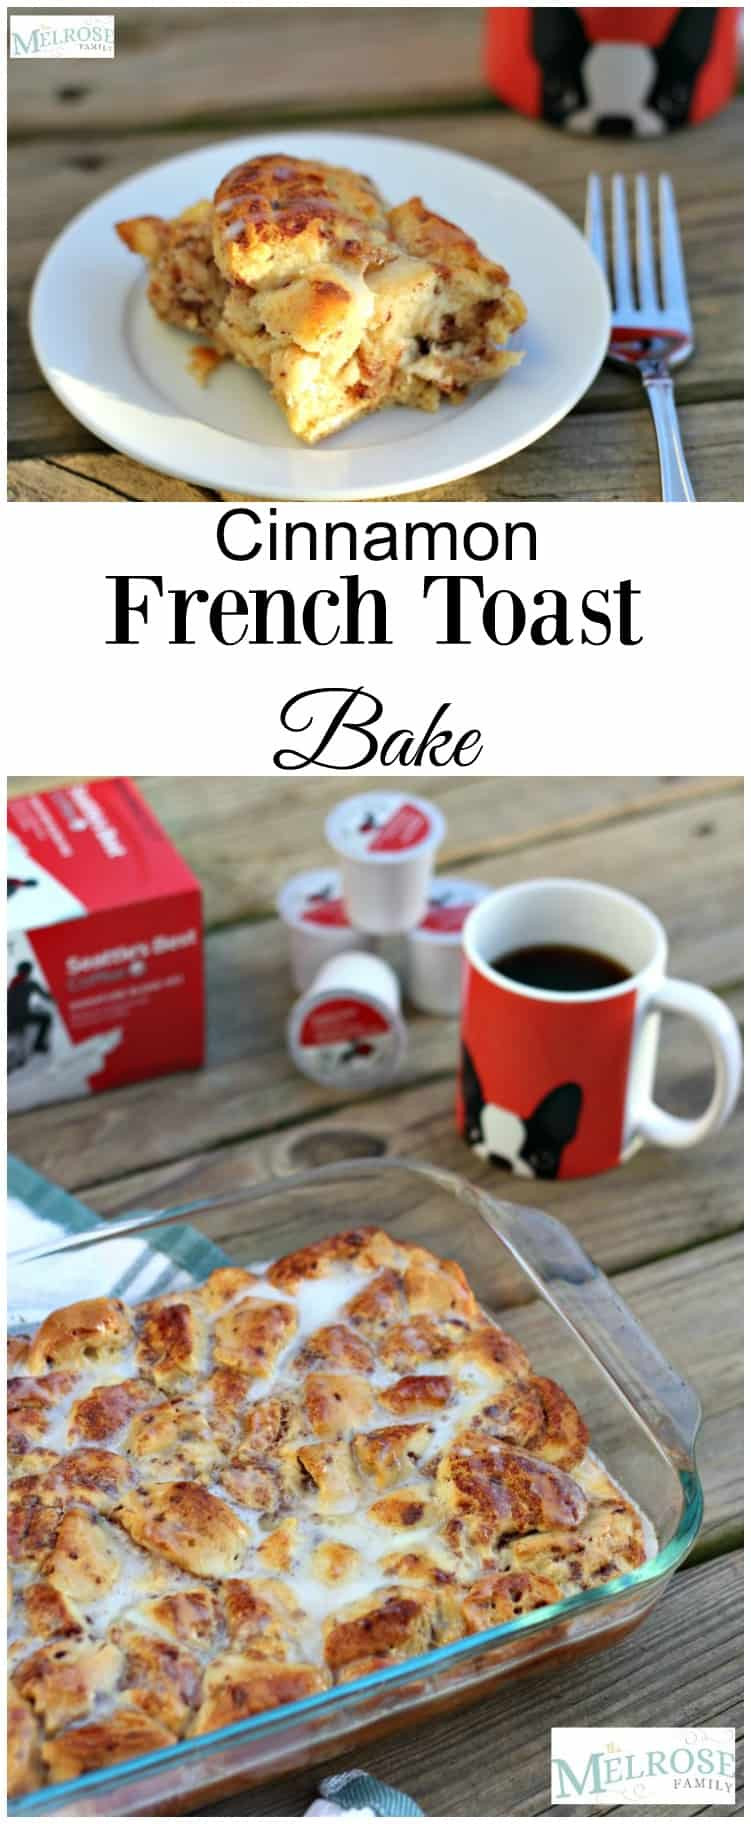 French Brunch Recipes
 Cinnamon French Toast Bake Brunch or Breakfast Recipe